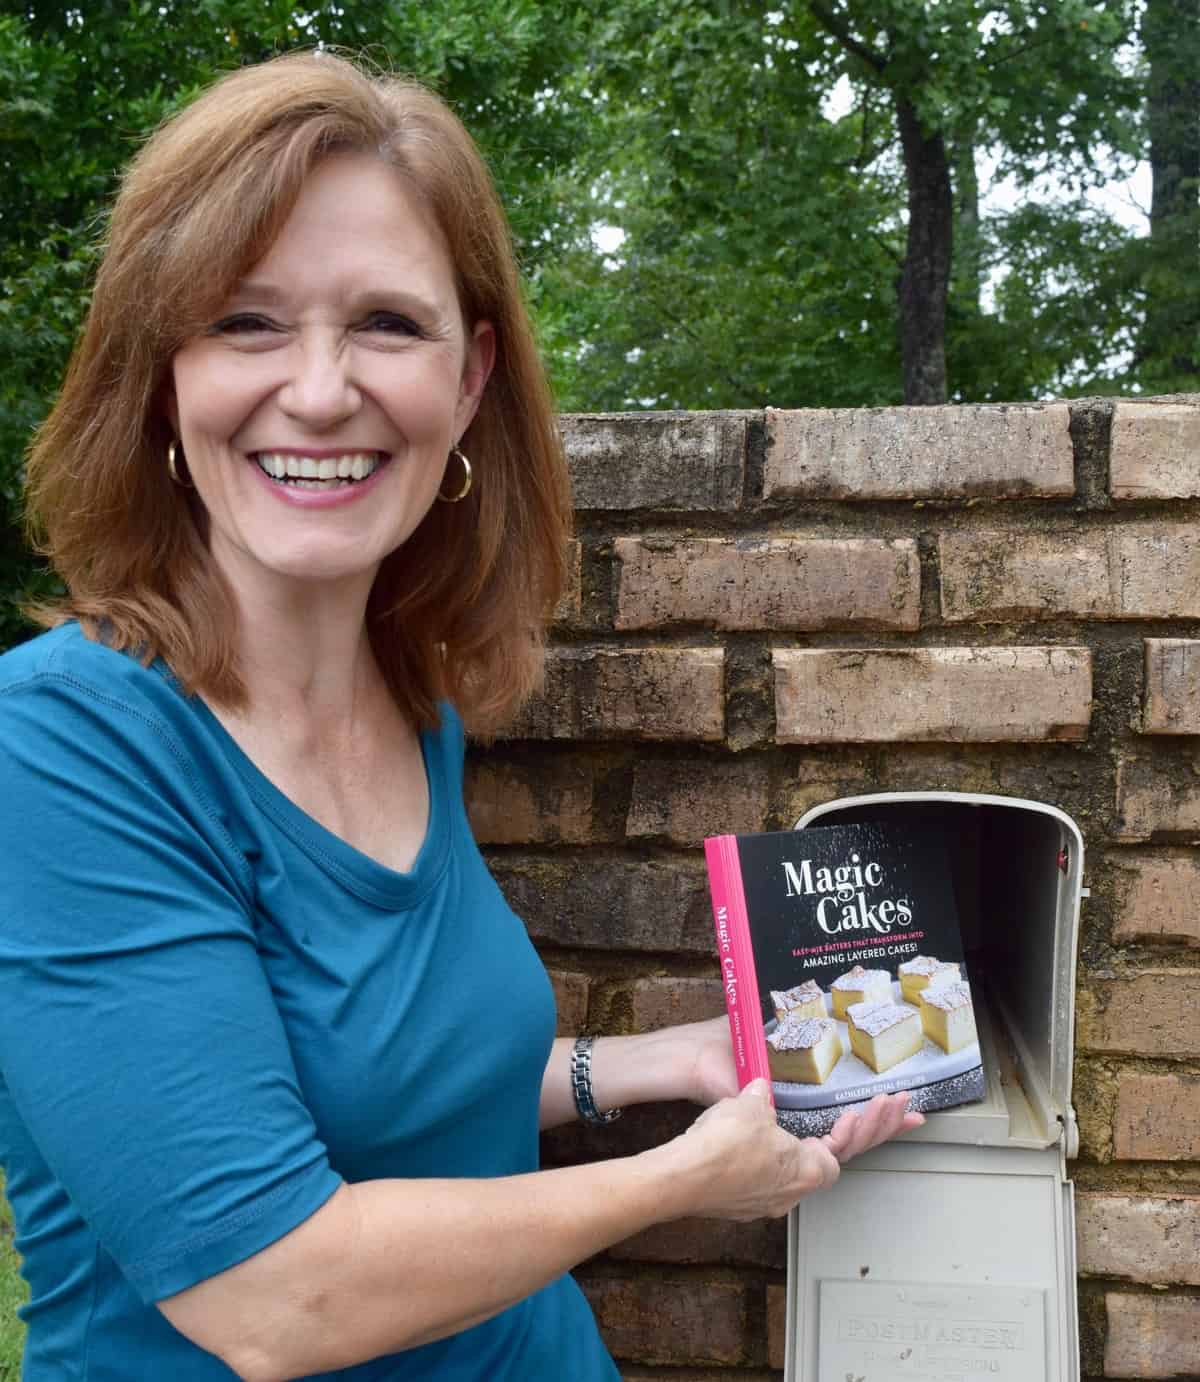 Woman in blue shirt getting a cookbook out of mailbox.